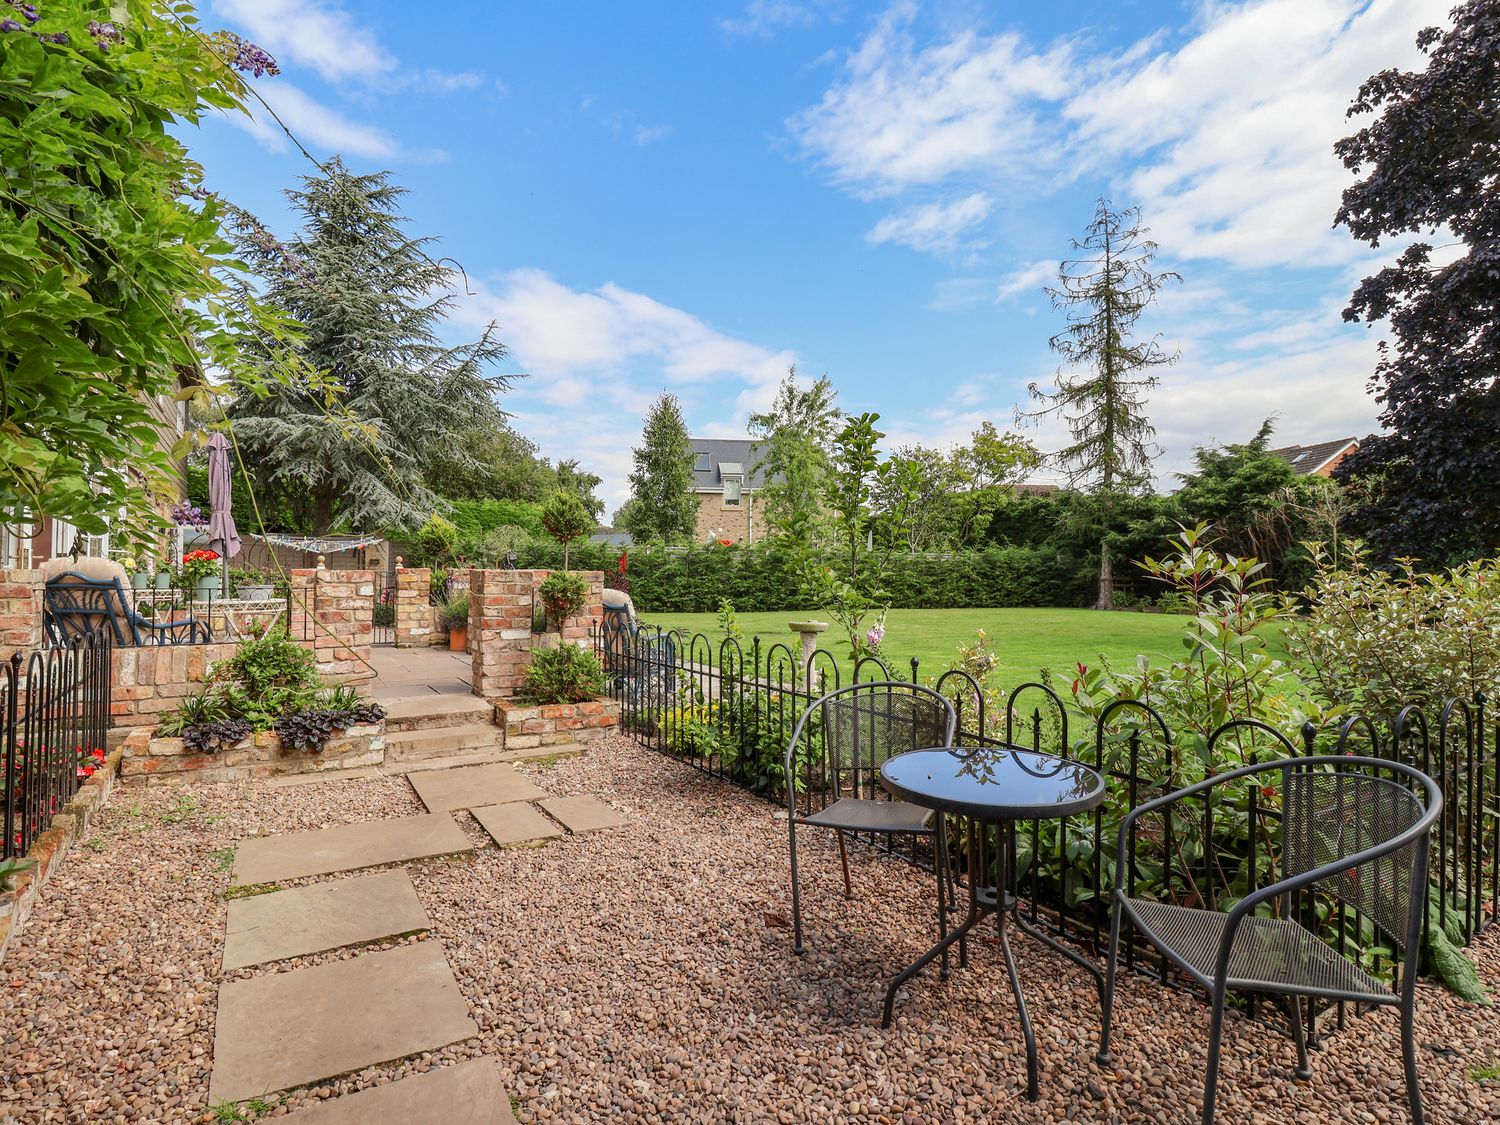 Harford House, Holme-On-Spalding-Moor, East Riding of Yorkshire. Close to amenities. Enclosed garden